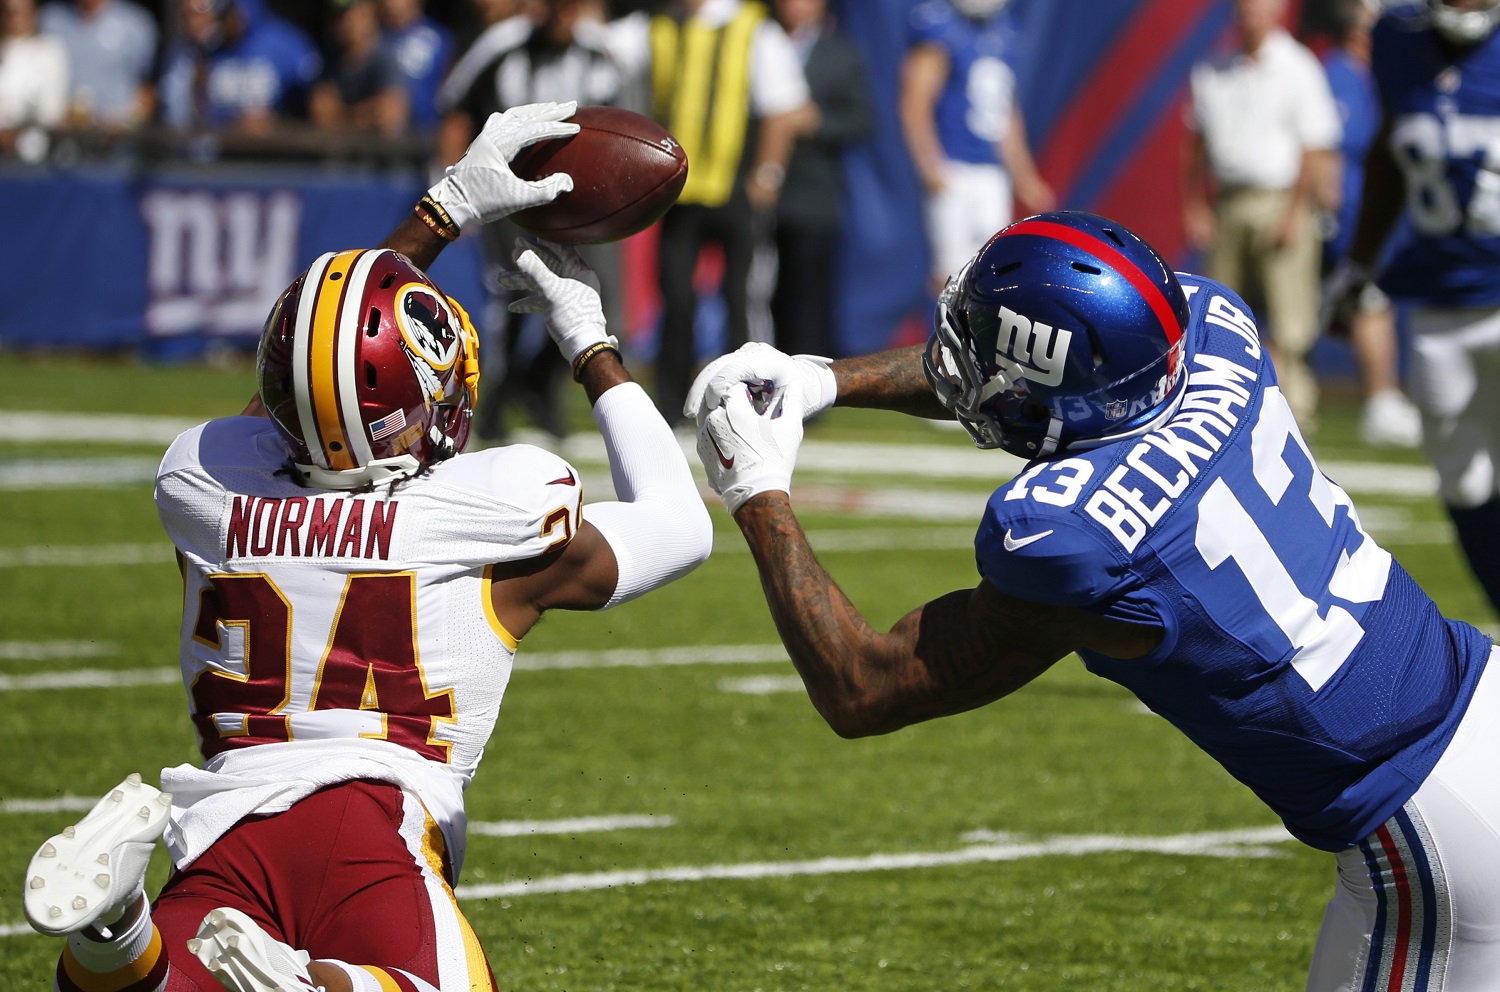 Washington Redskins cornerback Josh Norman (24) fights for control of the ball with New York Giants' Odell Beckham (13) during the first half of an NFL football game Sunday, Sept. 25, 2016, in East Rutherford, N.J. (AP Photo/Kathy Willens)